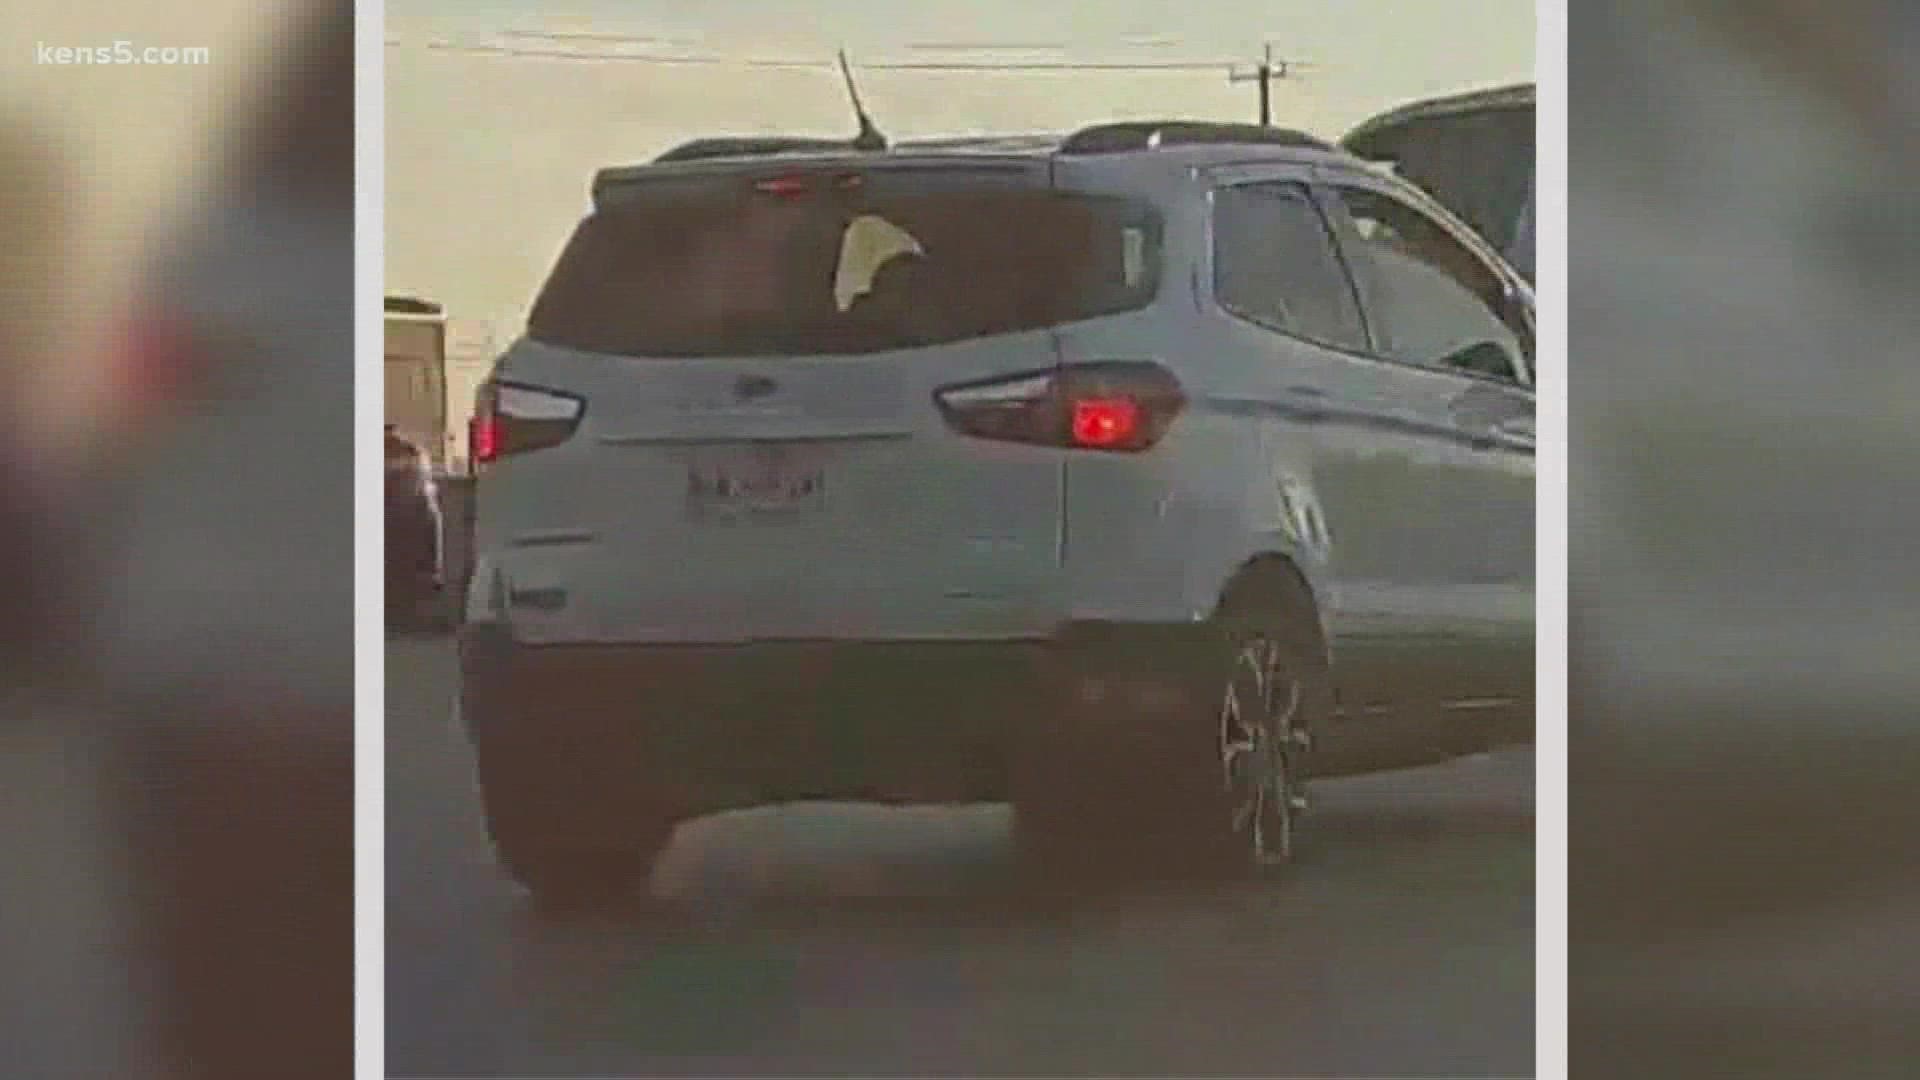 The sheriff believes Albino may have been involved in another road-rage incident that happened, last week, in San Antonio.